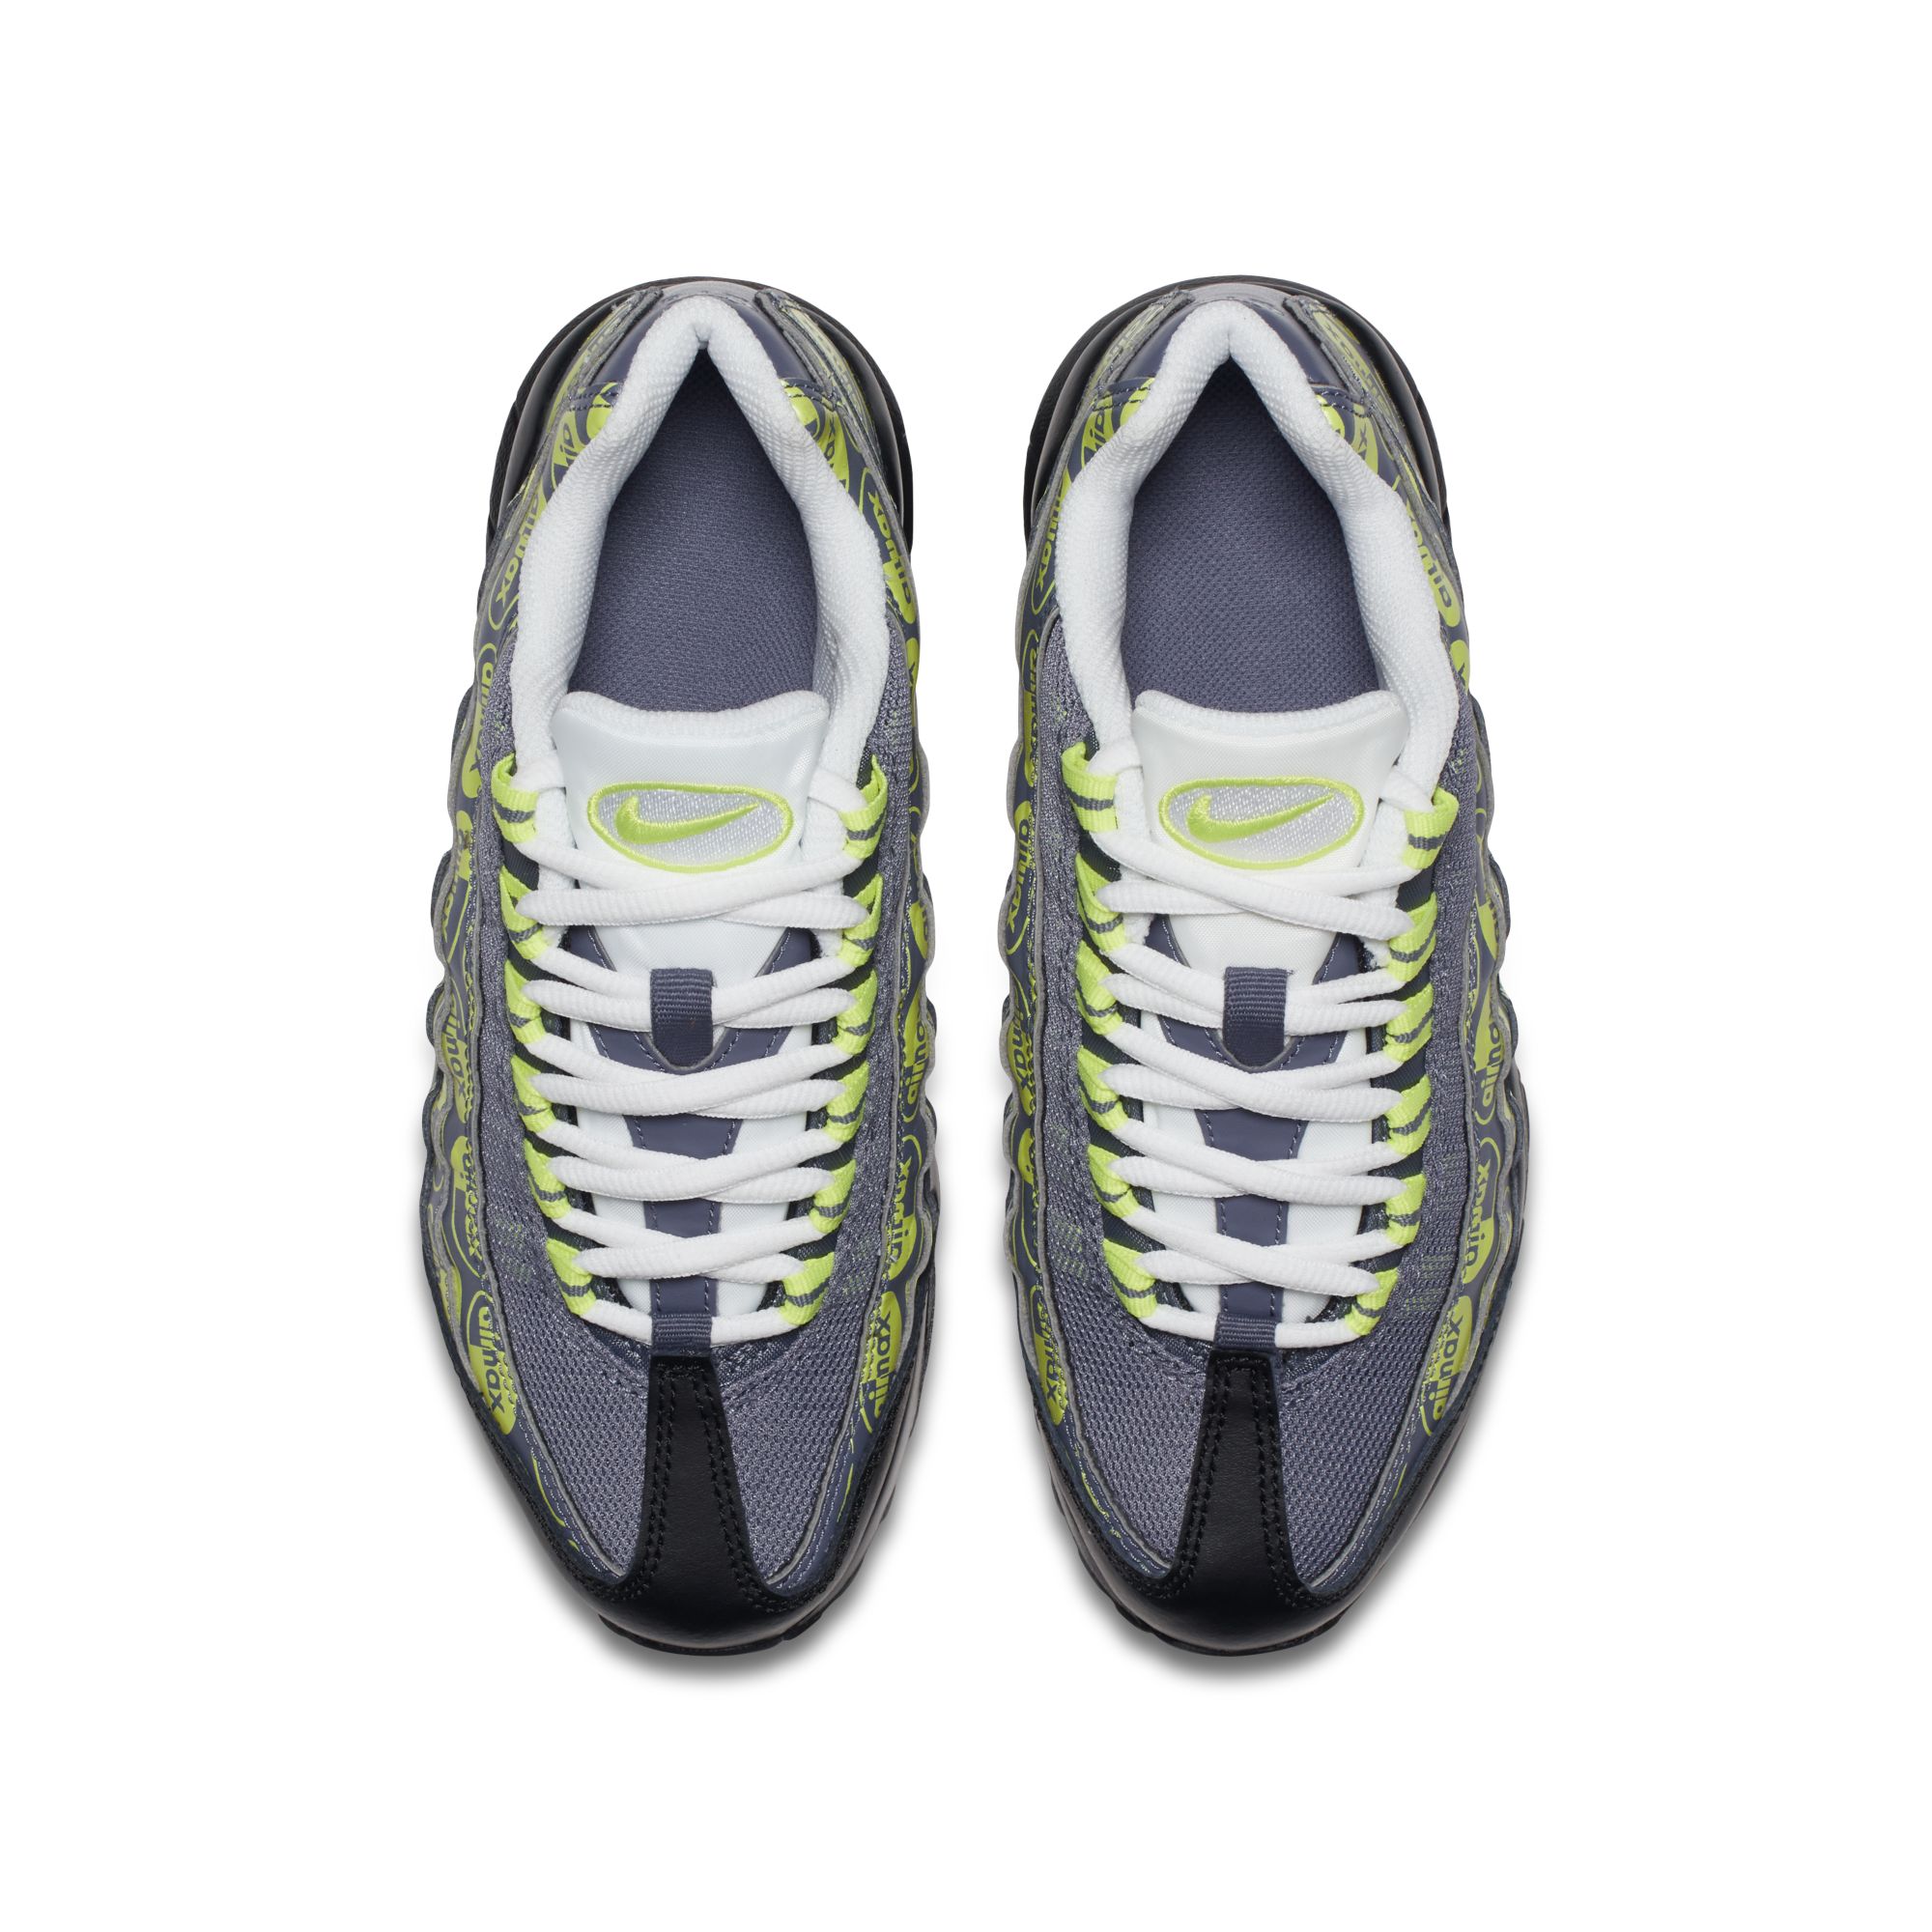 The Air Max 95 and Air Max 93 Have Been Combined to Create This Hybrid ...